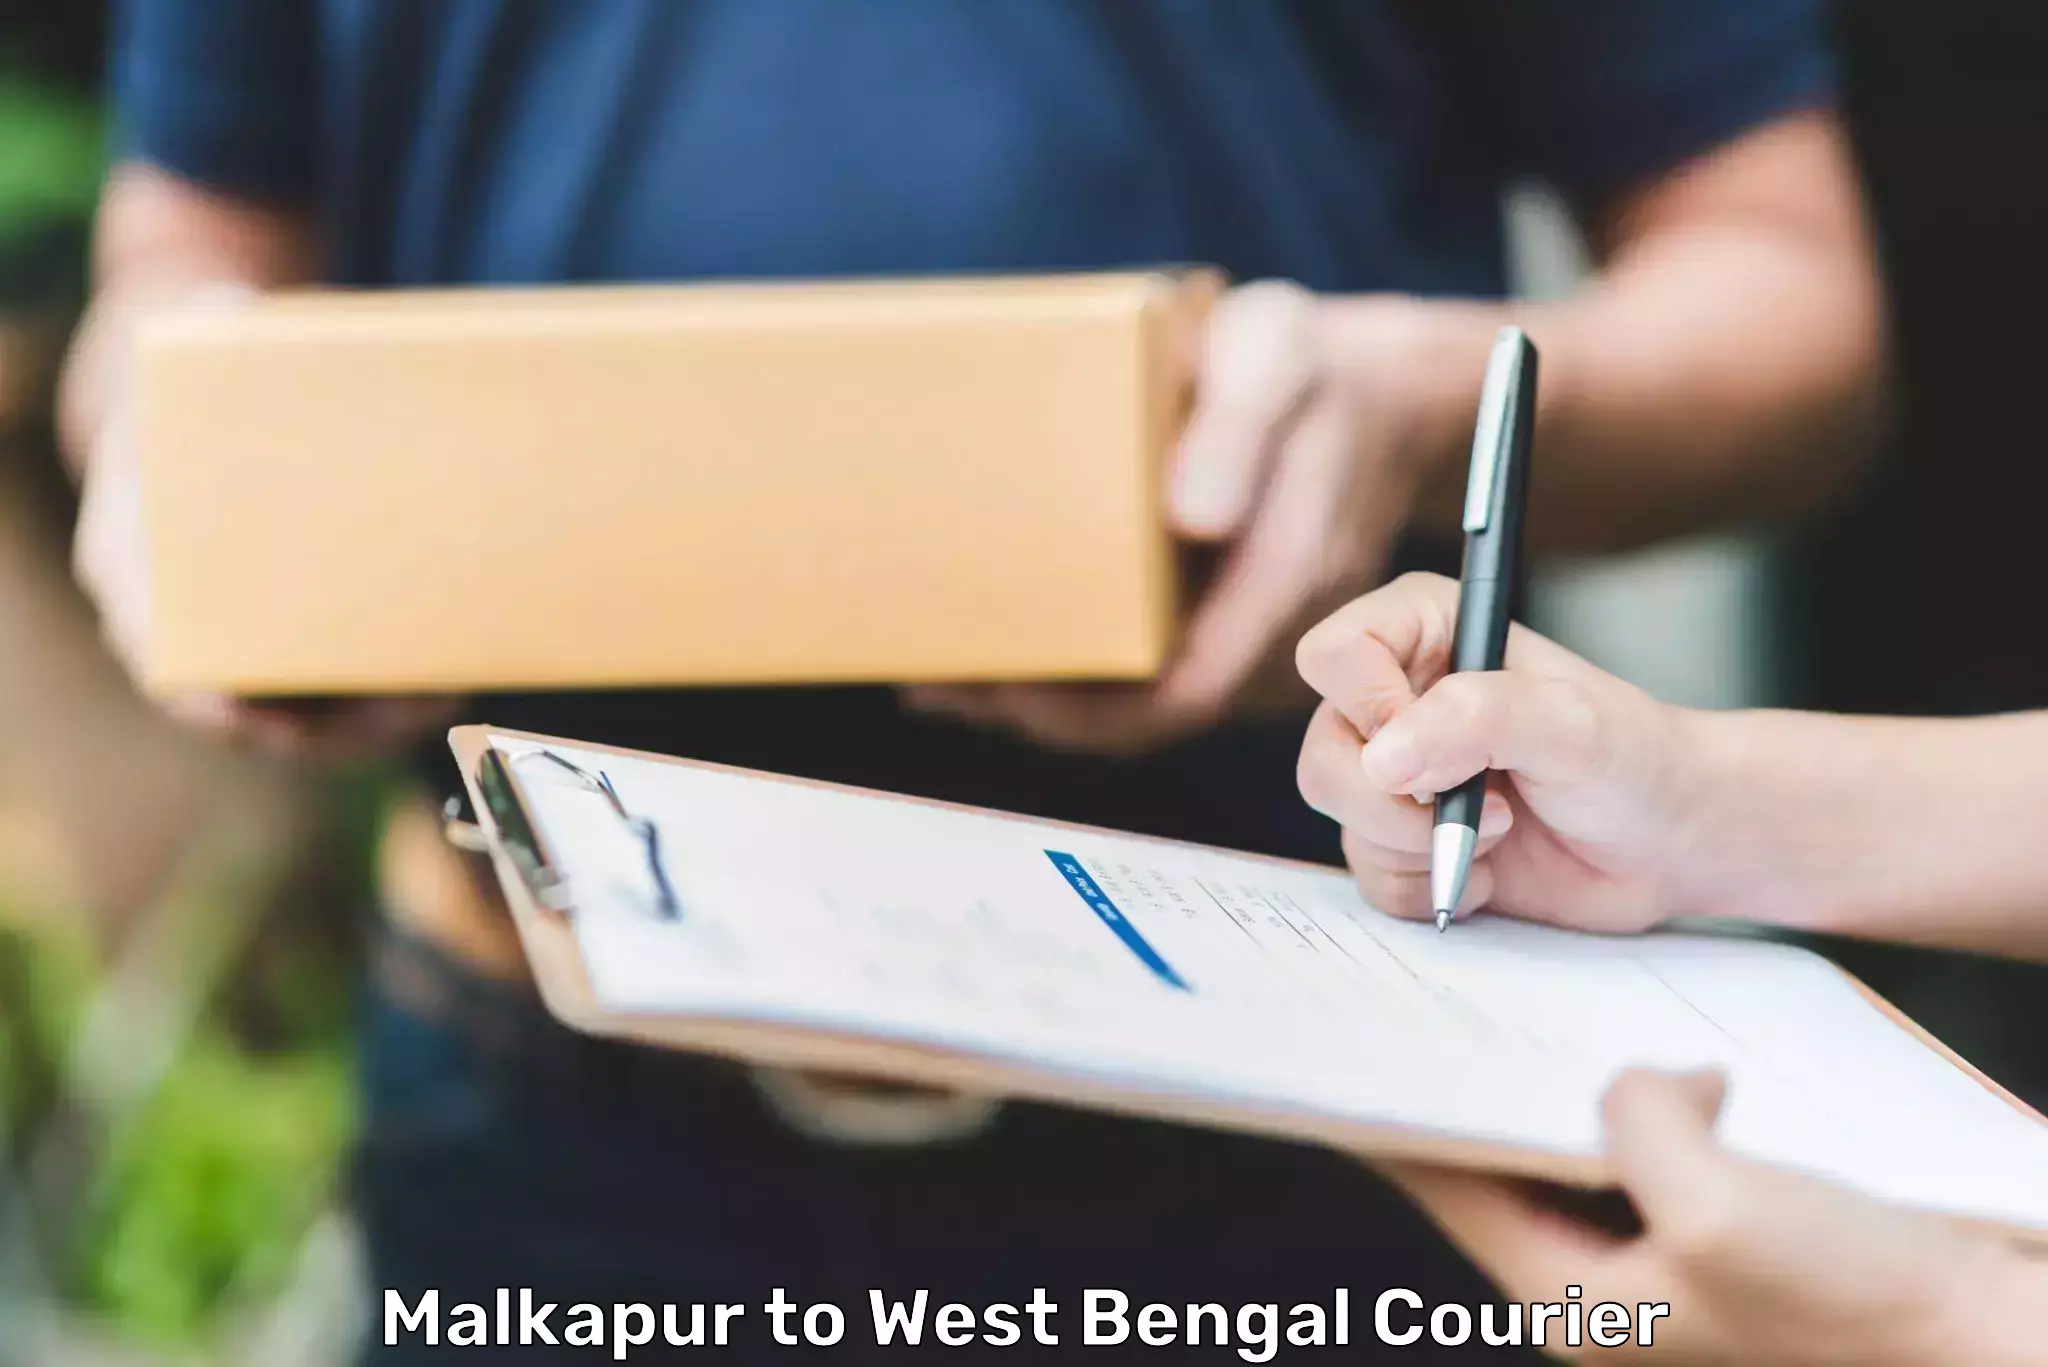 Professional courier handling Malkapur to North 24 Parganas